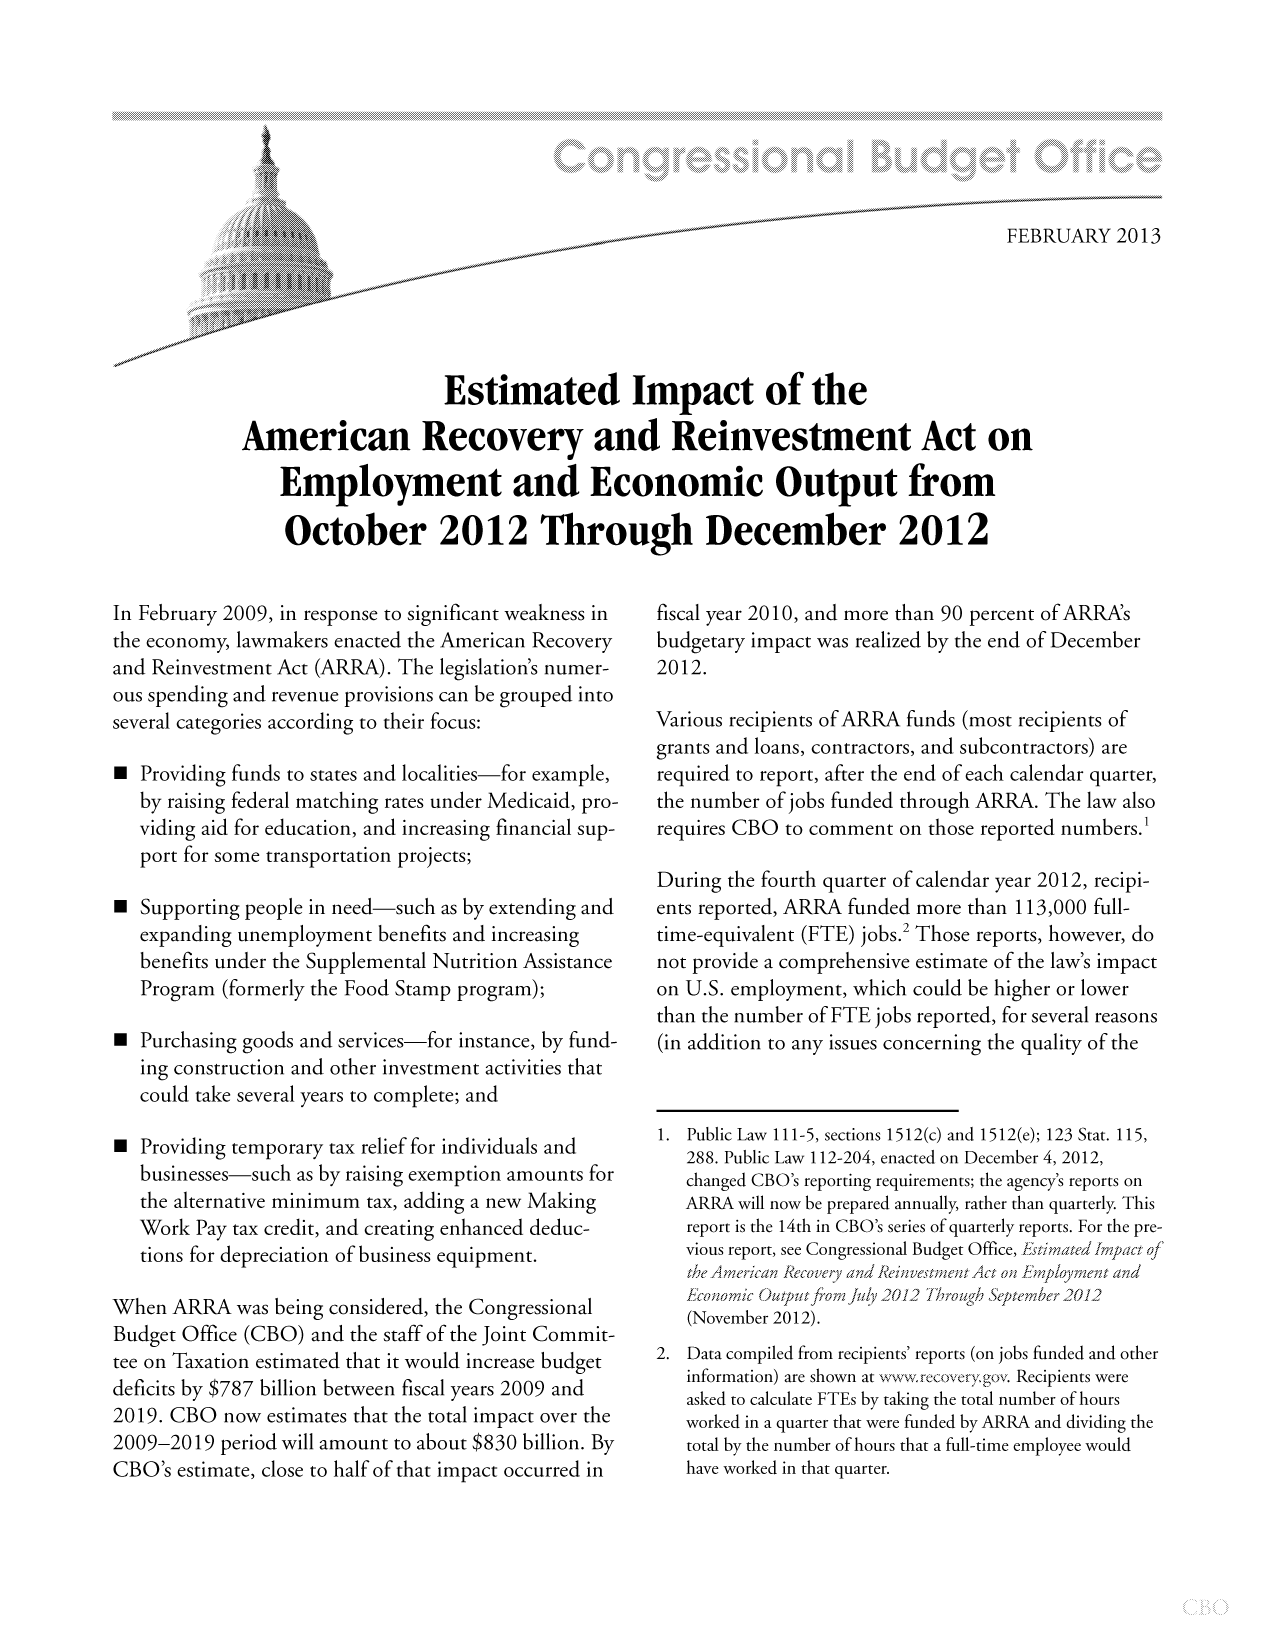 handle is hein.congrec/cbo10991 and id is 1 raw text is: FEBRUARY 2013
Estimated Impact of the
American Recovery and Reinvestment Act on
Employment and Economic Output from
October 2012 Through December 2012

In February 2009, in response to significant weakness in
the economy, lawmakers enacted the American Recovery
and Reinvestment Act (ARRA). The legislation's numer-
ous spending and revenue provisions can be grouped into
several categories according to their focus:
 Providing funds to states and localities-for example,
by raising federal matching rates under Medicaid, pro-
viding aid for education, and increasing financial sup-
port for some transportation projects;
 Supporting people in need-such as by extending and
expanding unemployment benefits and increasing
benefits under the Supplemental Nutrition Assistance
Program (formerly the Food Stamp program);
 Purchasing goods and services-for instance, by fund-
ing construction and other investment activities that
could take several years to complete; and
 Providing temporary tax relief for individuals and
businesses-such as by raising exemption amounts for
the alternative minimum tax, adding a new Making
Work Pay tax credit, and creating enhanced deduc-
tions for depreciation of business equipment.
When ARRA was being considered, the Congressional
Budget Office (CBO) and the staff of the Joint Commit-
tee on Taxation estimated that it would increase budget
deficits by $787 billion between fiscal years 2009 and
2019. CBO now estimates that the total impact over the
2009-2019 period will amount to about $830 billion. By
CBO's estimate, close to half of that impact occurred in

fiscal year 2010, and more than 90 percent of ARRAs
budgetary impact was realized by the end of December
2012.
Various recipients of ARRA funds (most recipients of
grants and loans, contractors, and subcontractors) are
required to report, after the end of each calendar quarter,
the number of jobs funded through ARRA. The law also
requires CBO to comment on those reported numbers.
During the fourth quarter of calendar year 2012, recipi-
ents reported, ARRA funded more than 113,000 full-
time-equivalent (FTE) jobs.2 Those reports, however, do
not provide a comprehensive estimate of the law's impact
on U.S. employment, which could be higher or lower
than the number of FTE jobs reported, for several reasons
(in addition to any issues concerning the quality of the
1. Public Law 111-5, sections 1512(c) and 1512(e); 123 Stat. 115,
288. Public Law 112-204, enacted on December 4, 2012,
changed CBO's reporting requirements; the agency's reports on
ARRA will now be prepared annually, rather than quarterly. This
report is the 14th in CBO's series of quarterly reports. For the pre-
vious report, see Congressional Budget Office, EstimatedImpact of
the American Recovery and InvestnuitAct on Emqloyment and
conomic Outputfromful )20.12 Trough September 2012
(November 2012).
2. Data compiled from recipients' reports (on jobs funded and other
information) are shown at wwwrecovery go. Recipients were
asked to calculate FTEs by taking the total number of hours
worked in a quarter that were funded by ARRA and dividing the
total by the number of hours that a full-time employee would
have worked in that quarter.


